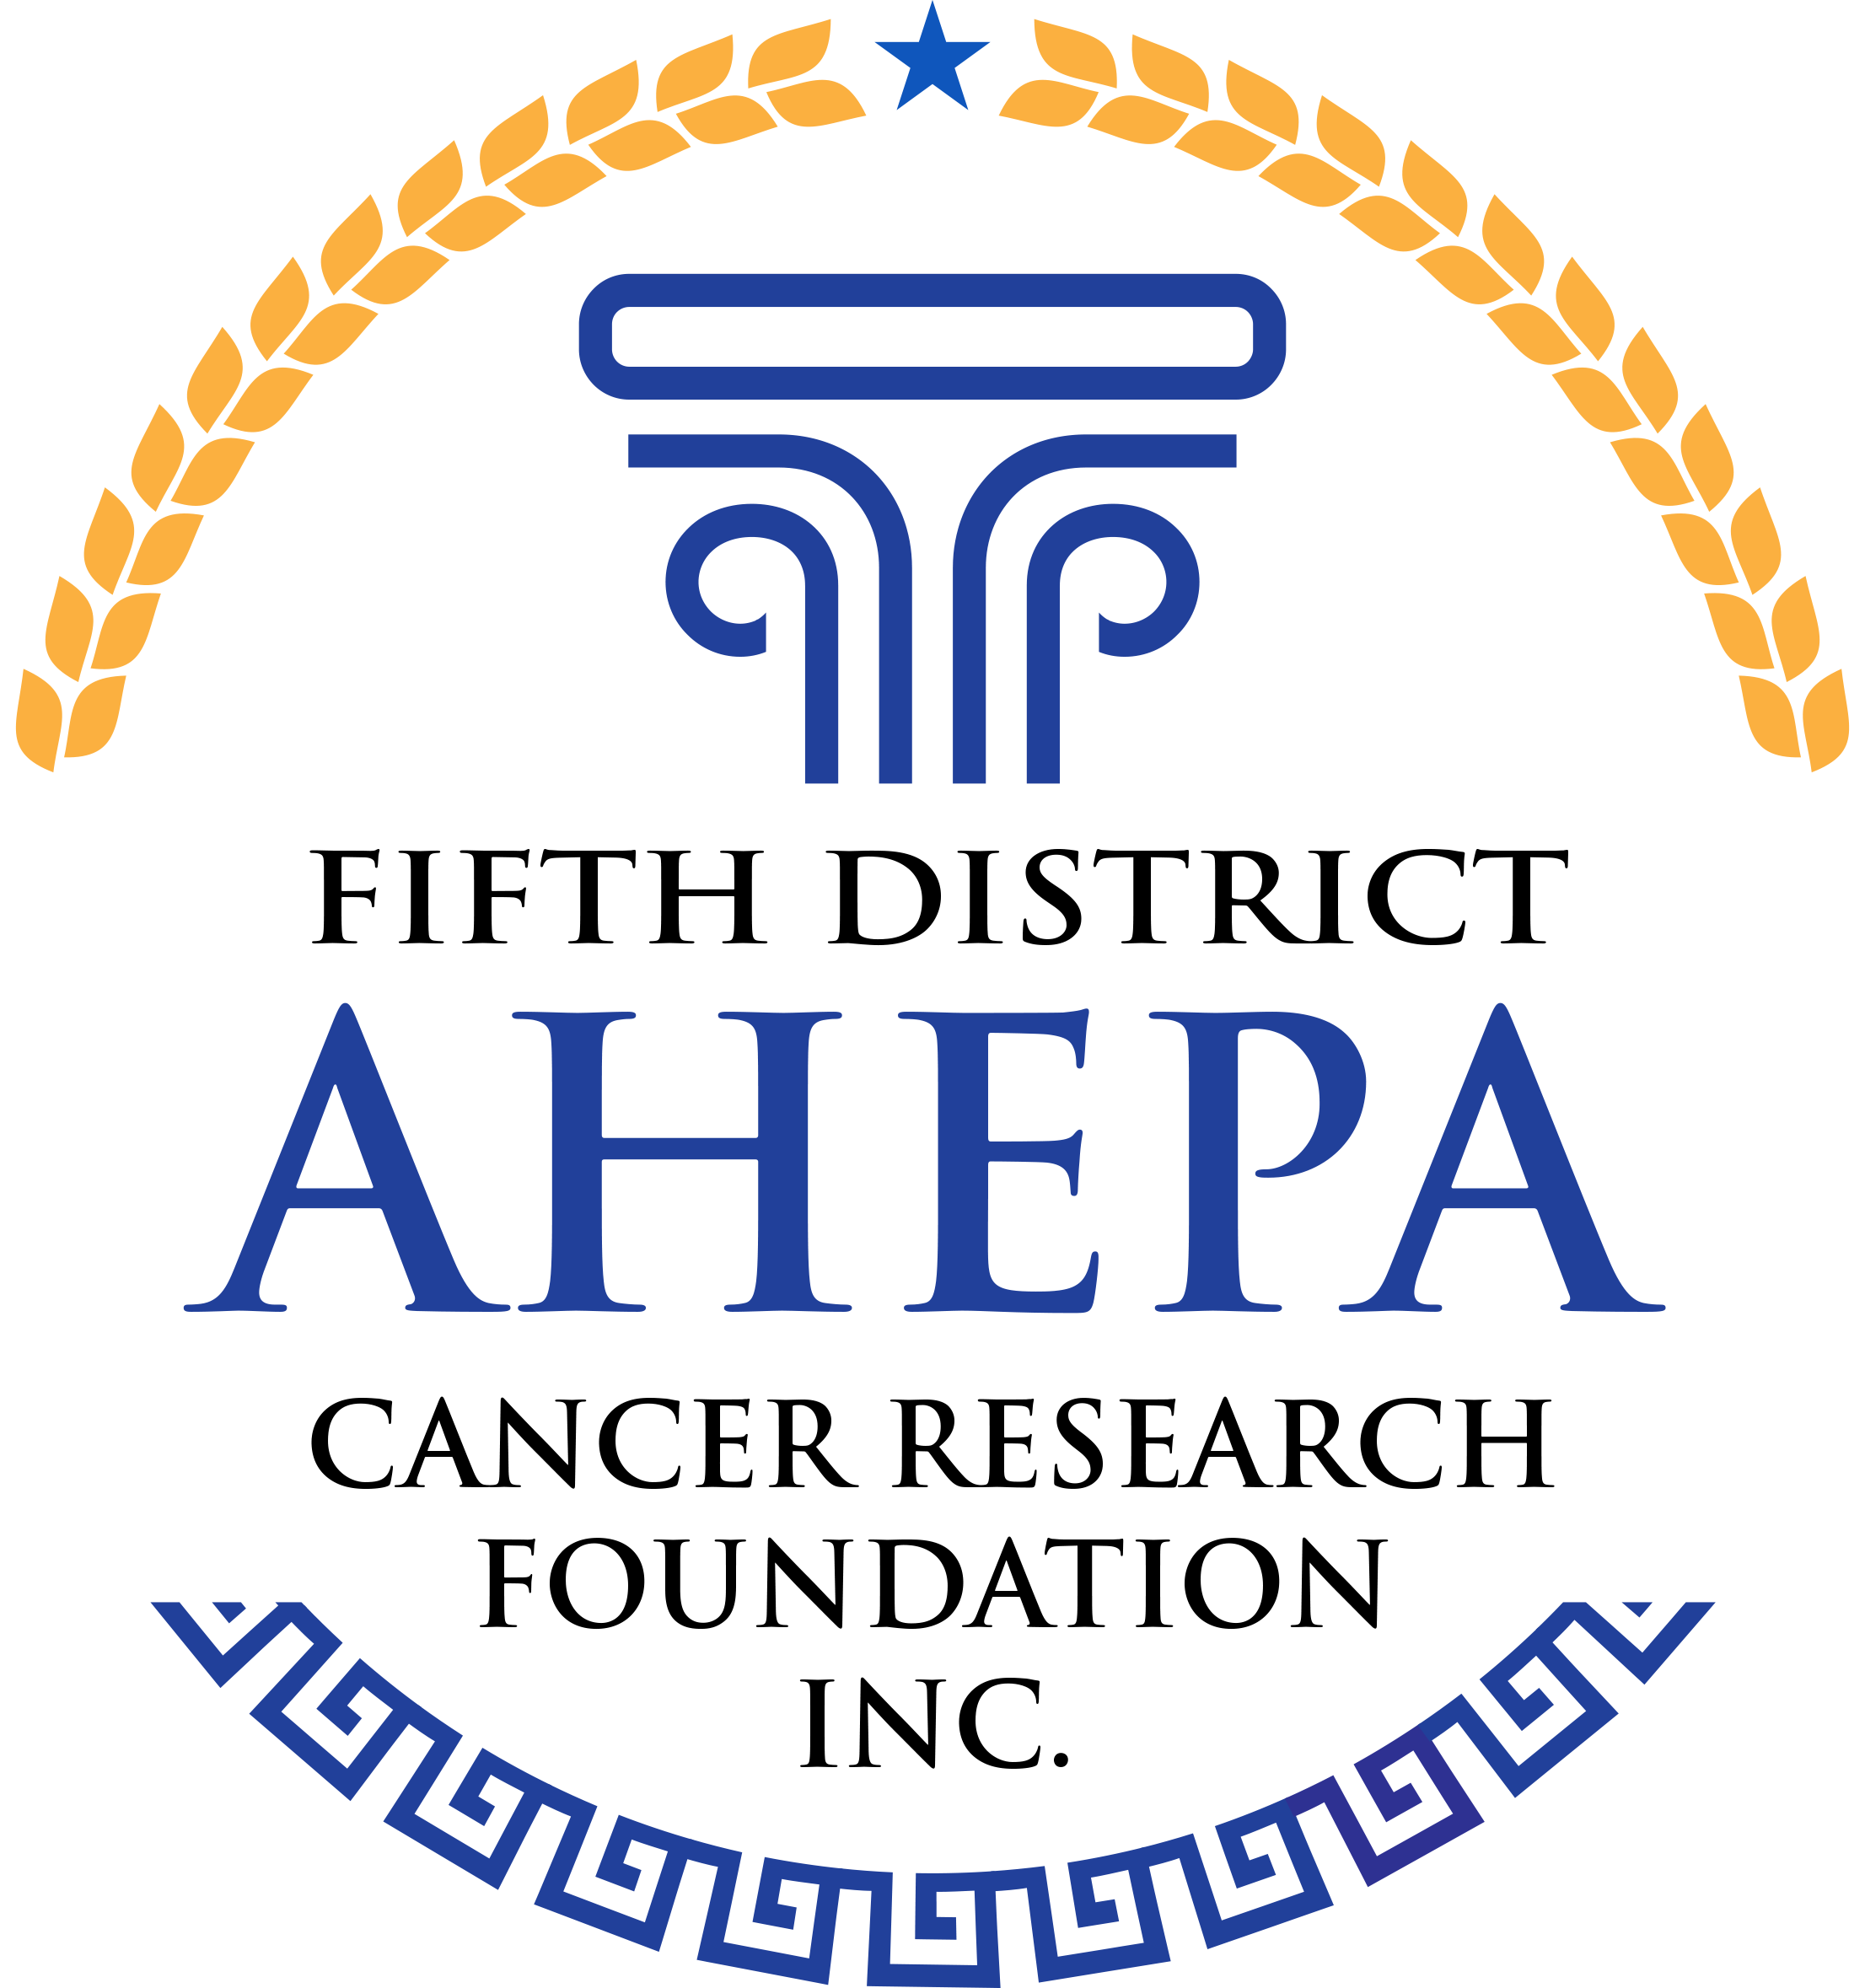 Fifth District AHEPA Cancer Foundation